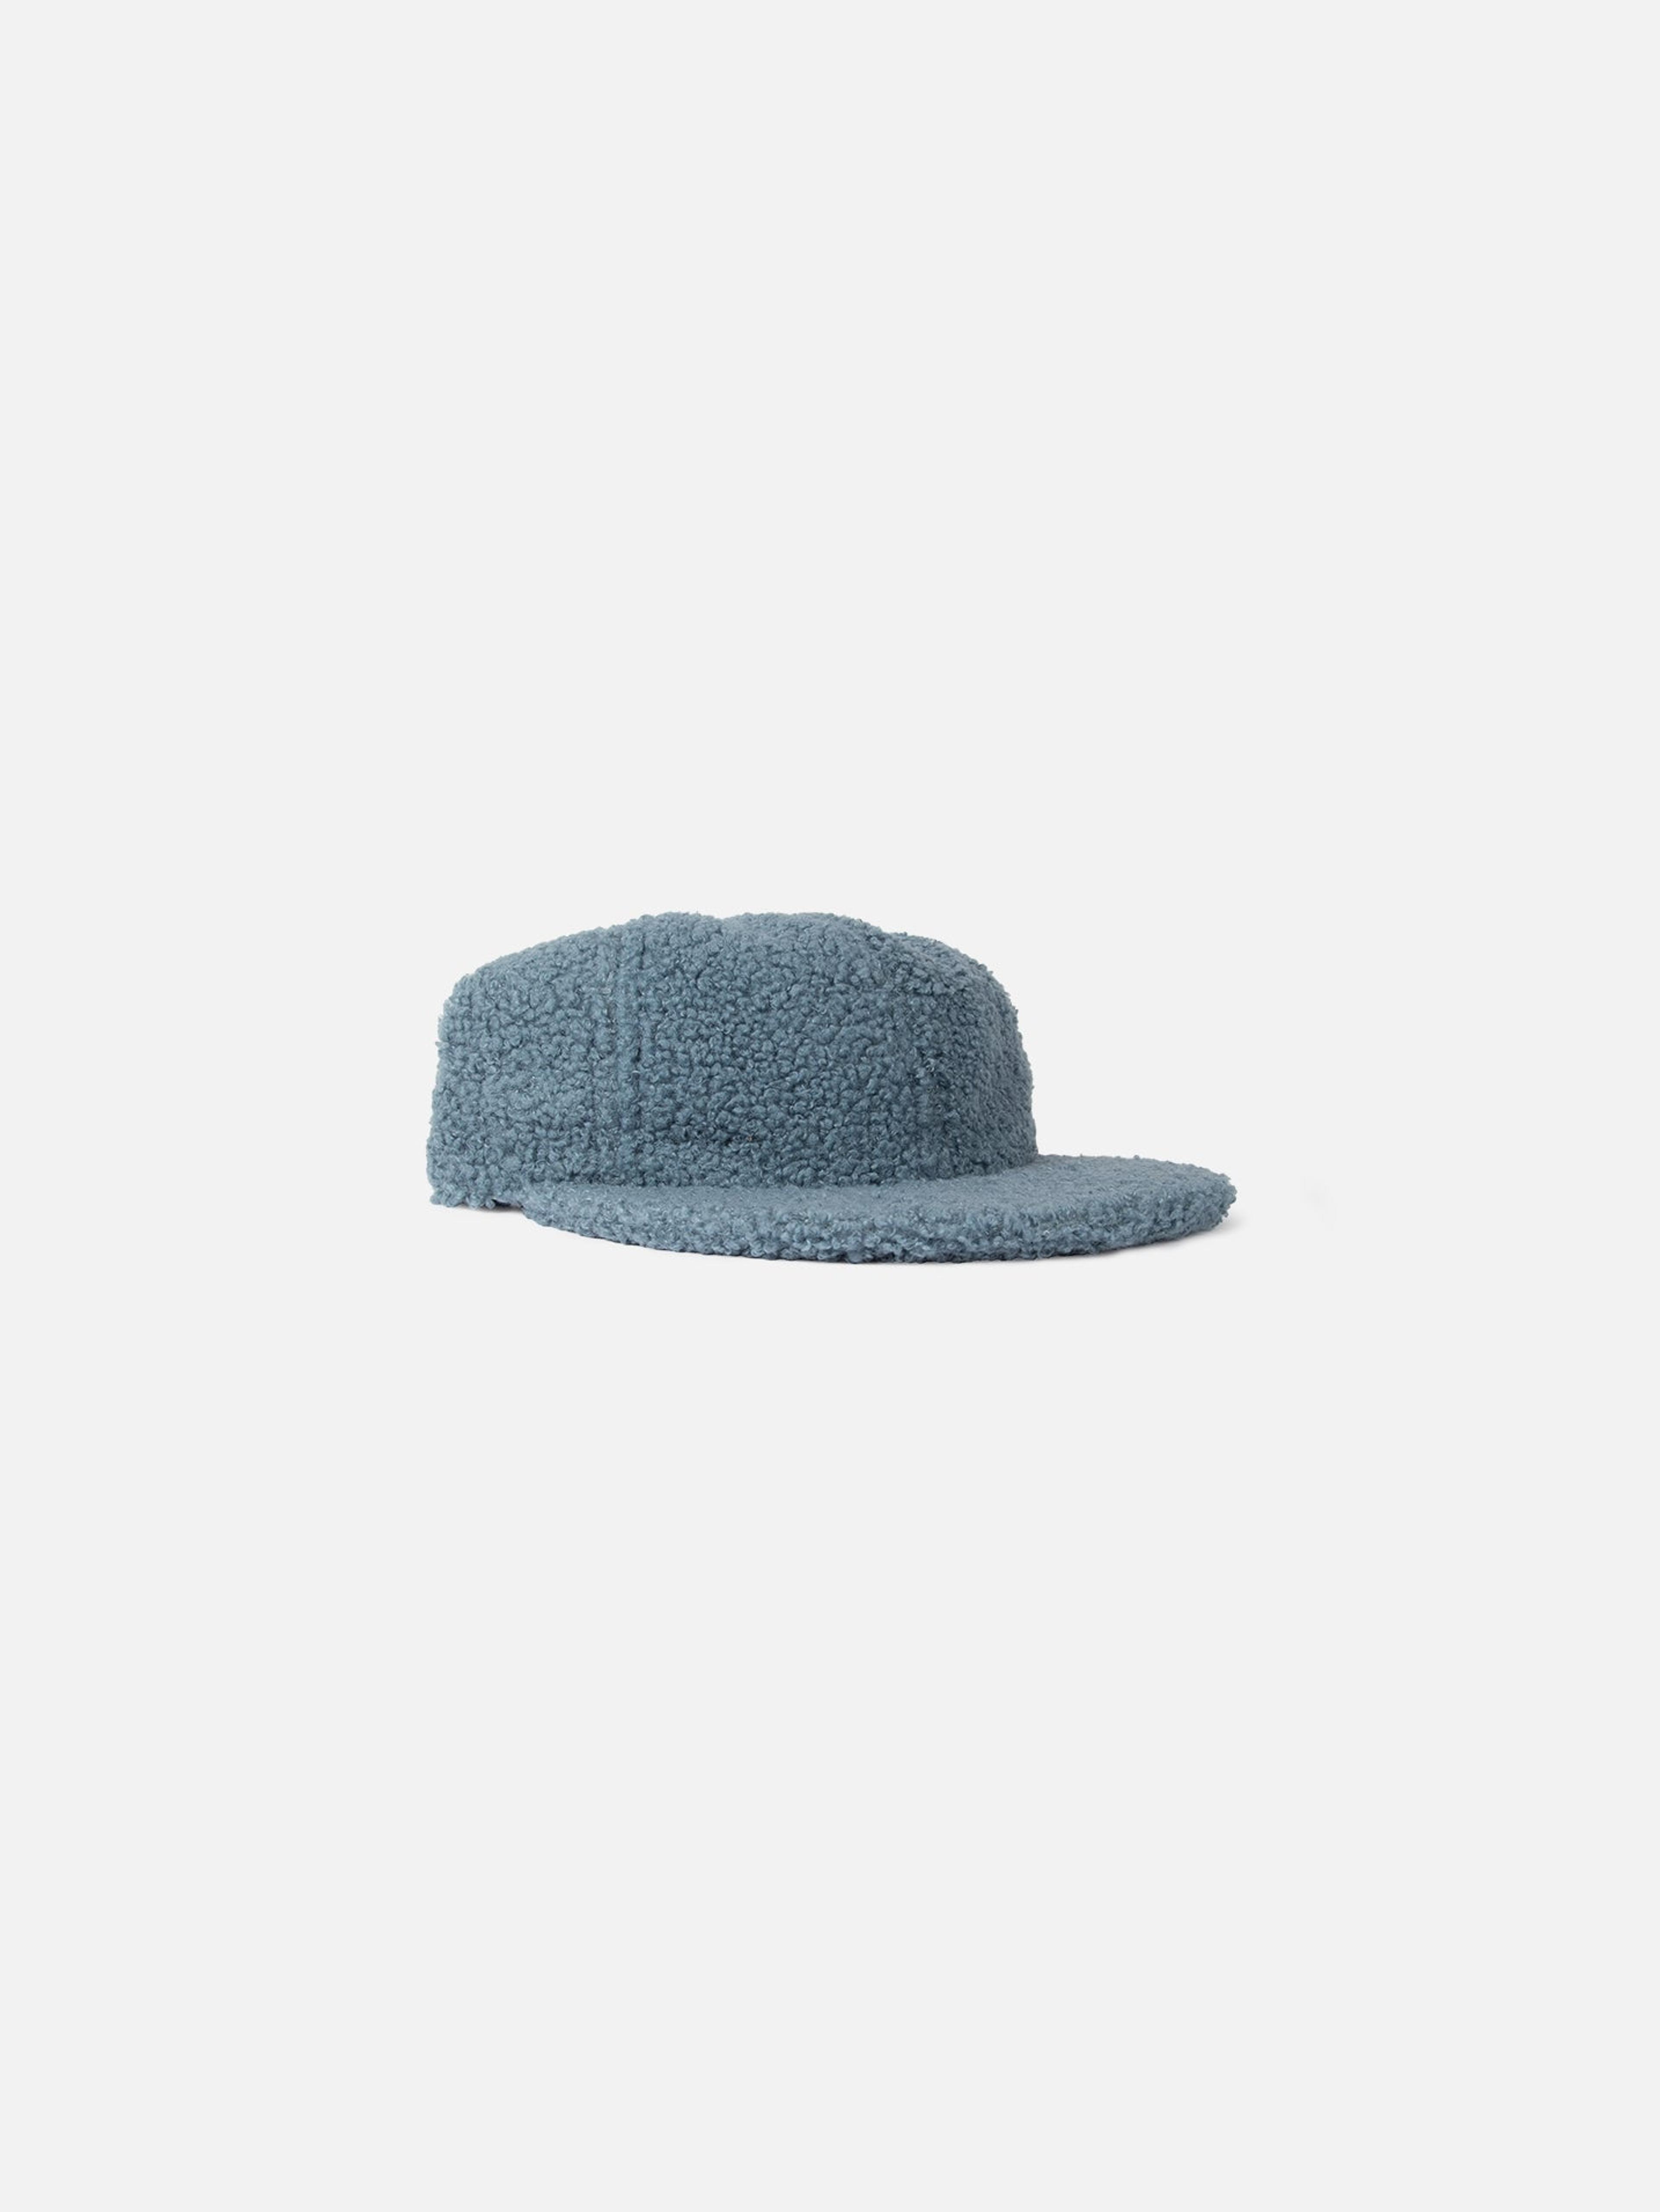 Alternate View 1 of 6 Panel Boucle Ball Cap - Steel Blue